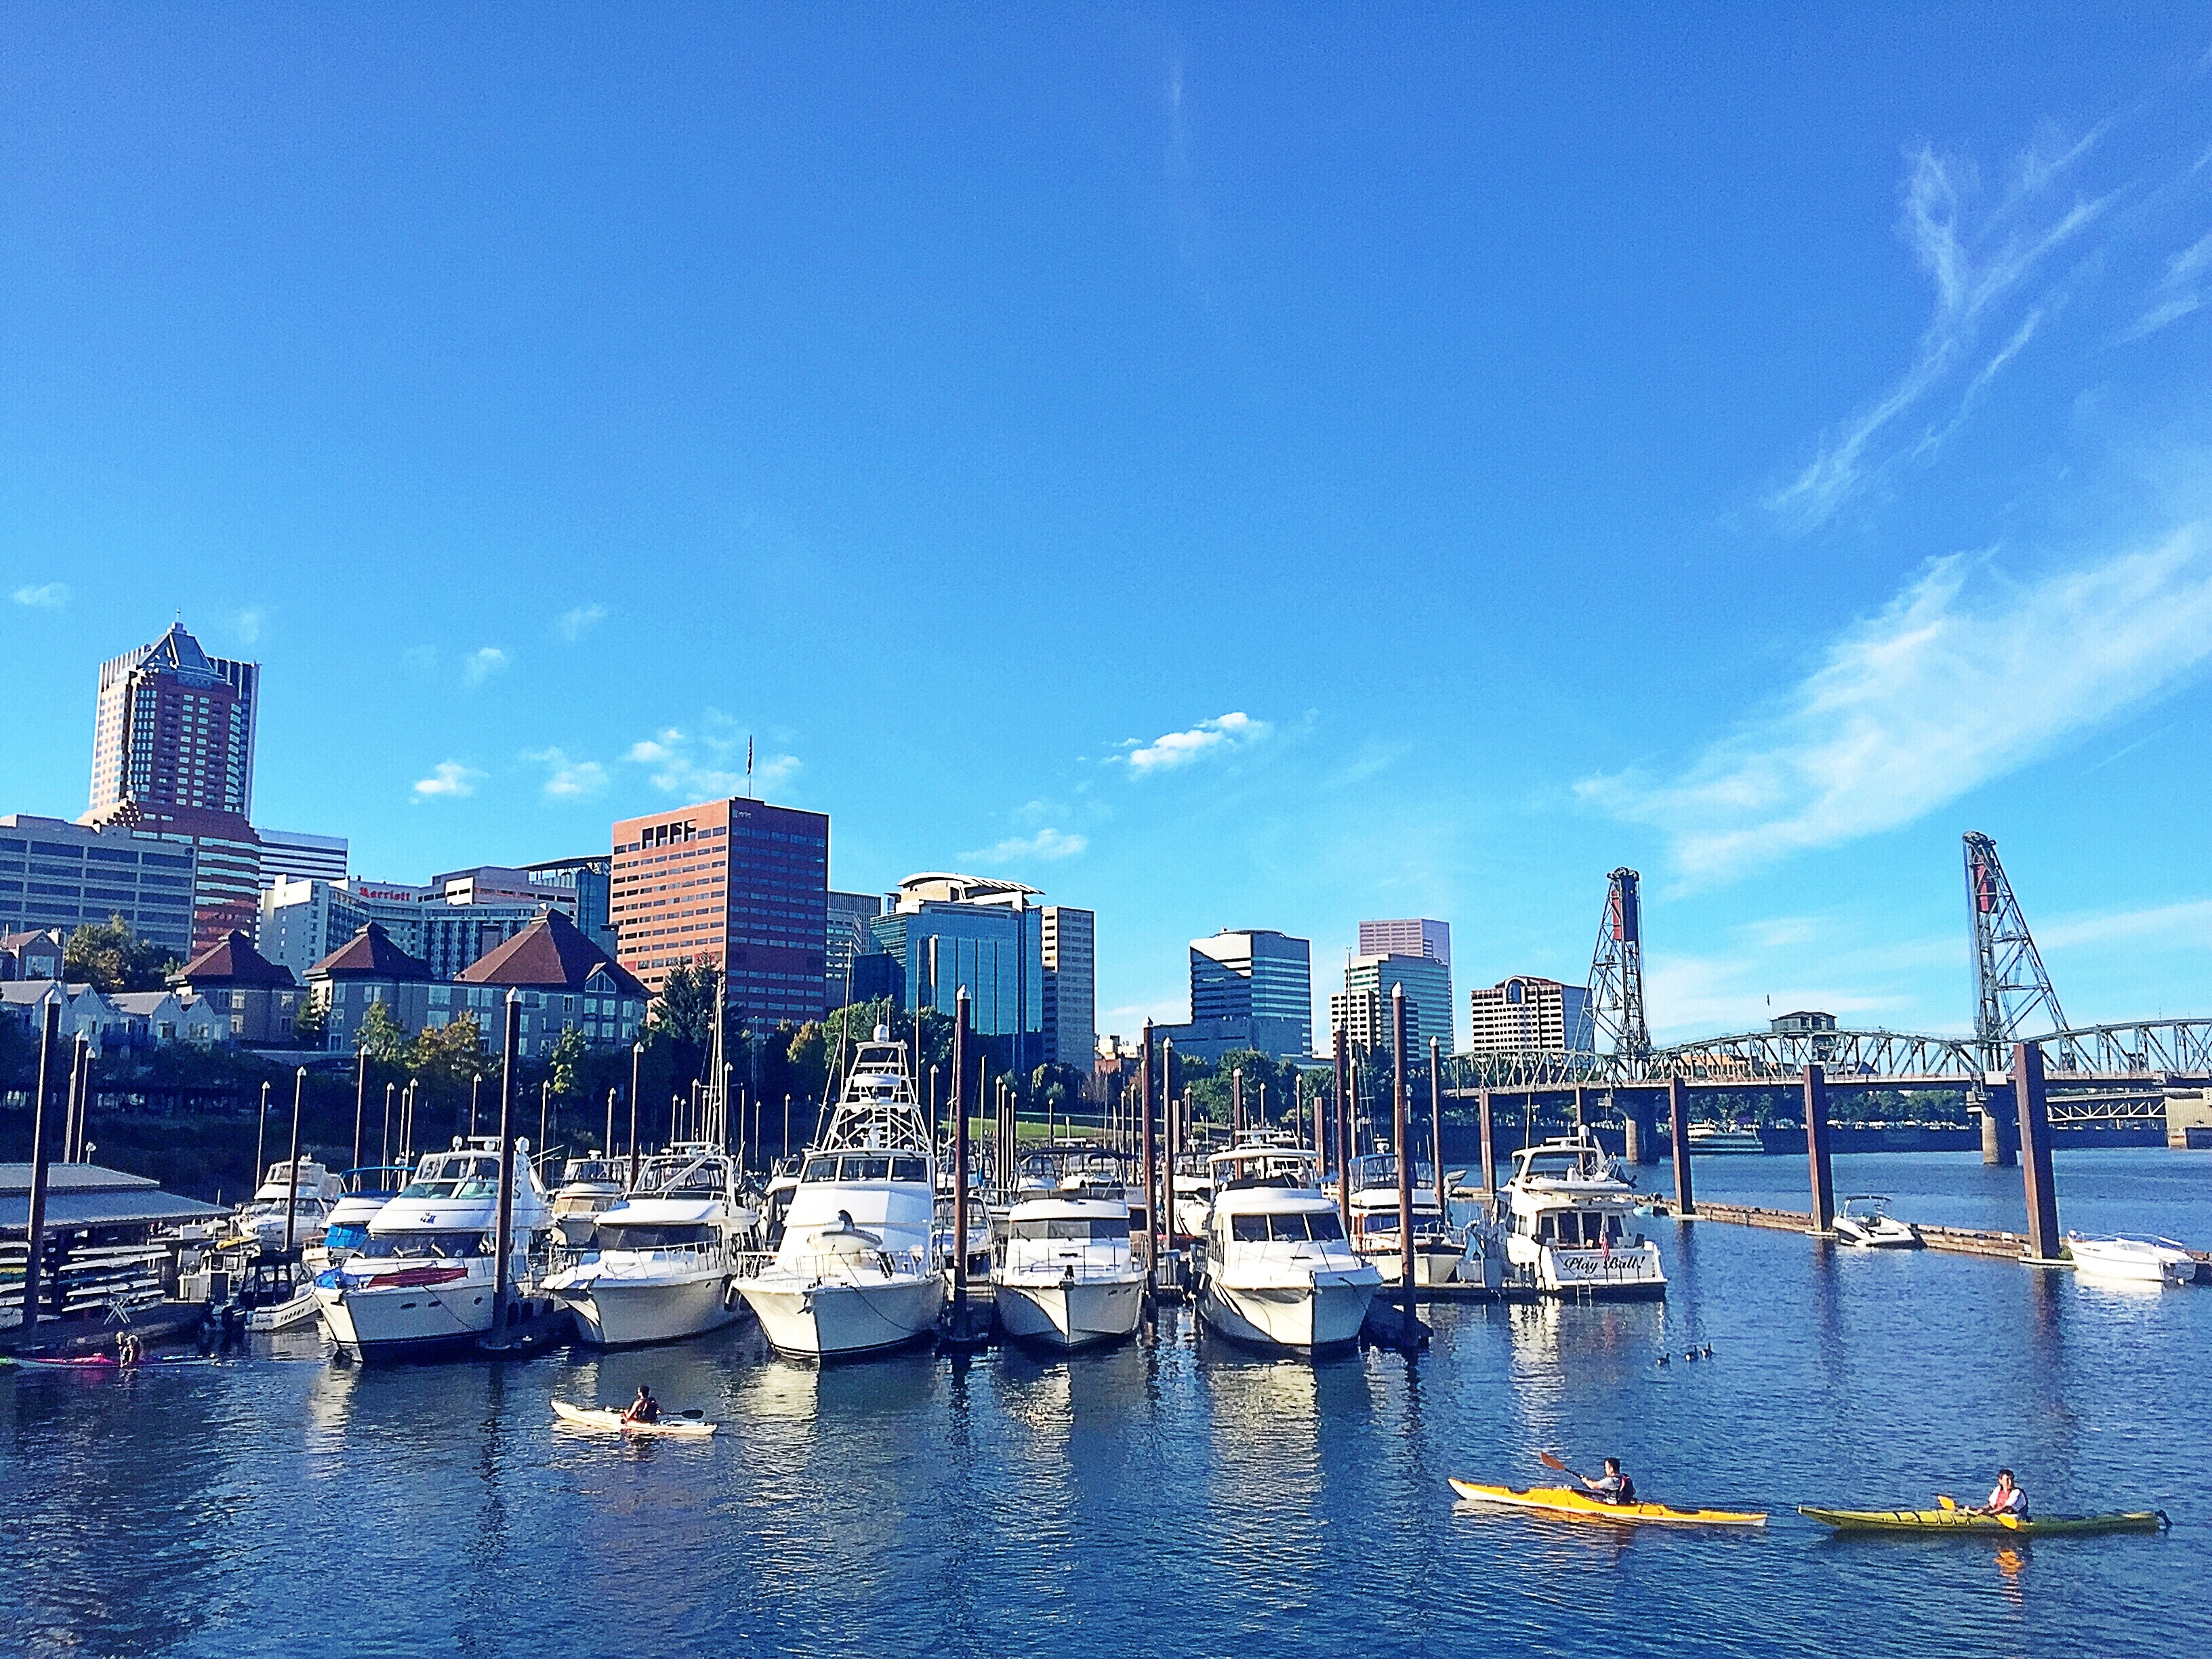 7 things to consider before moving to Portland, Oregon